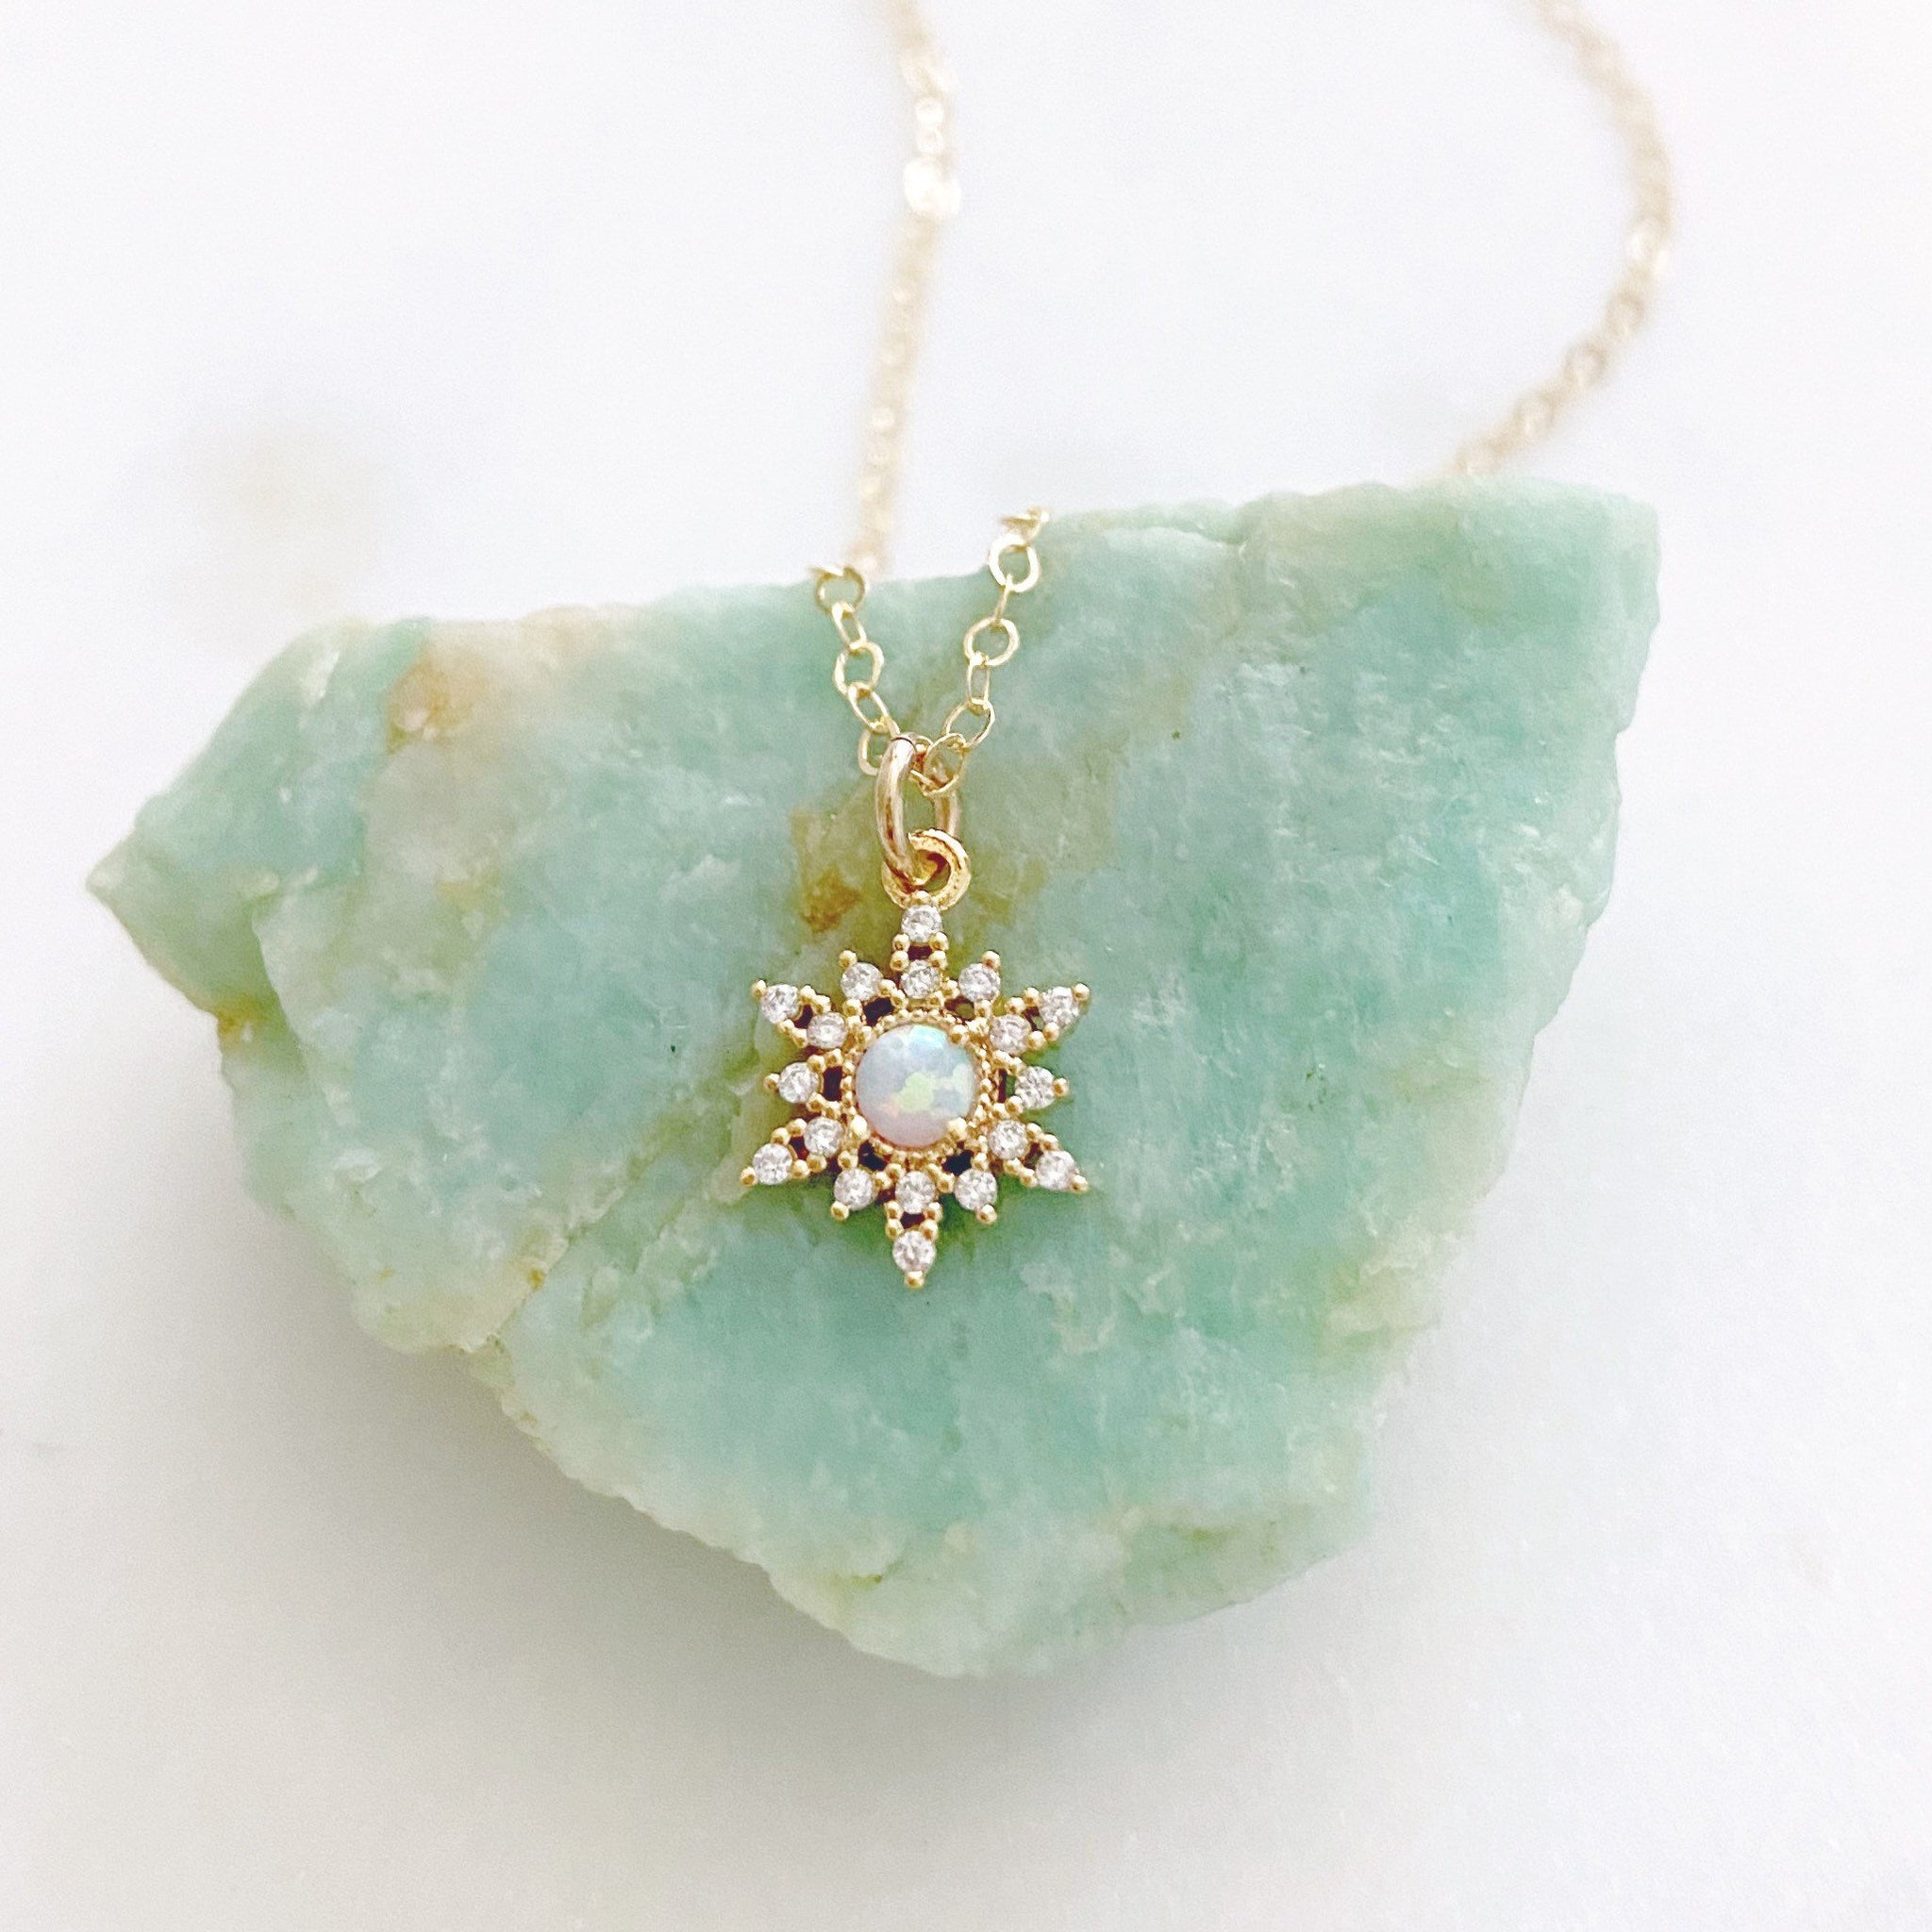 Snowflake Necklace, Dainty Opal Necklace, Stocking Stuffers for Women, EVERETT